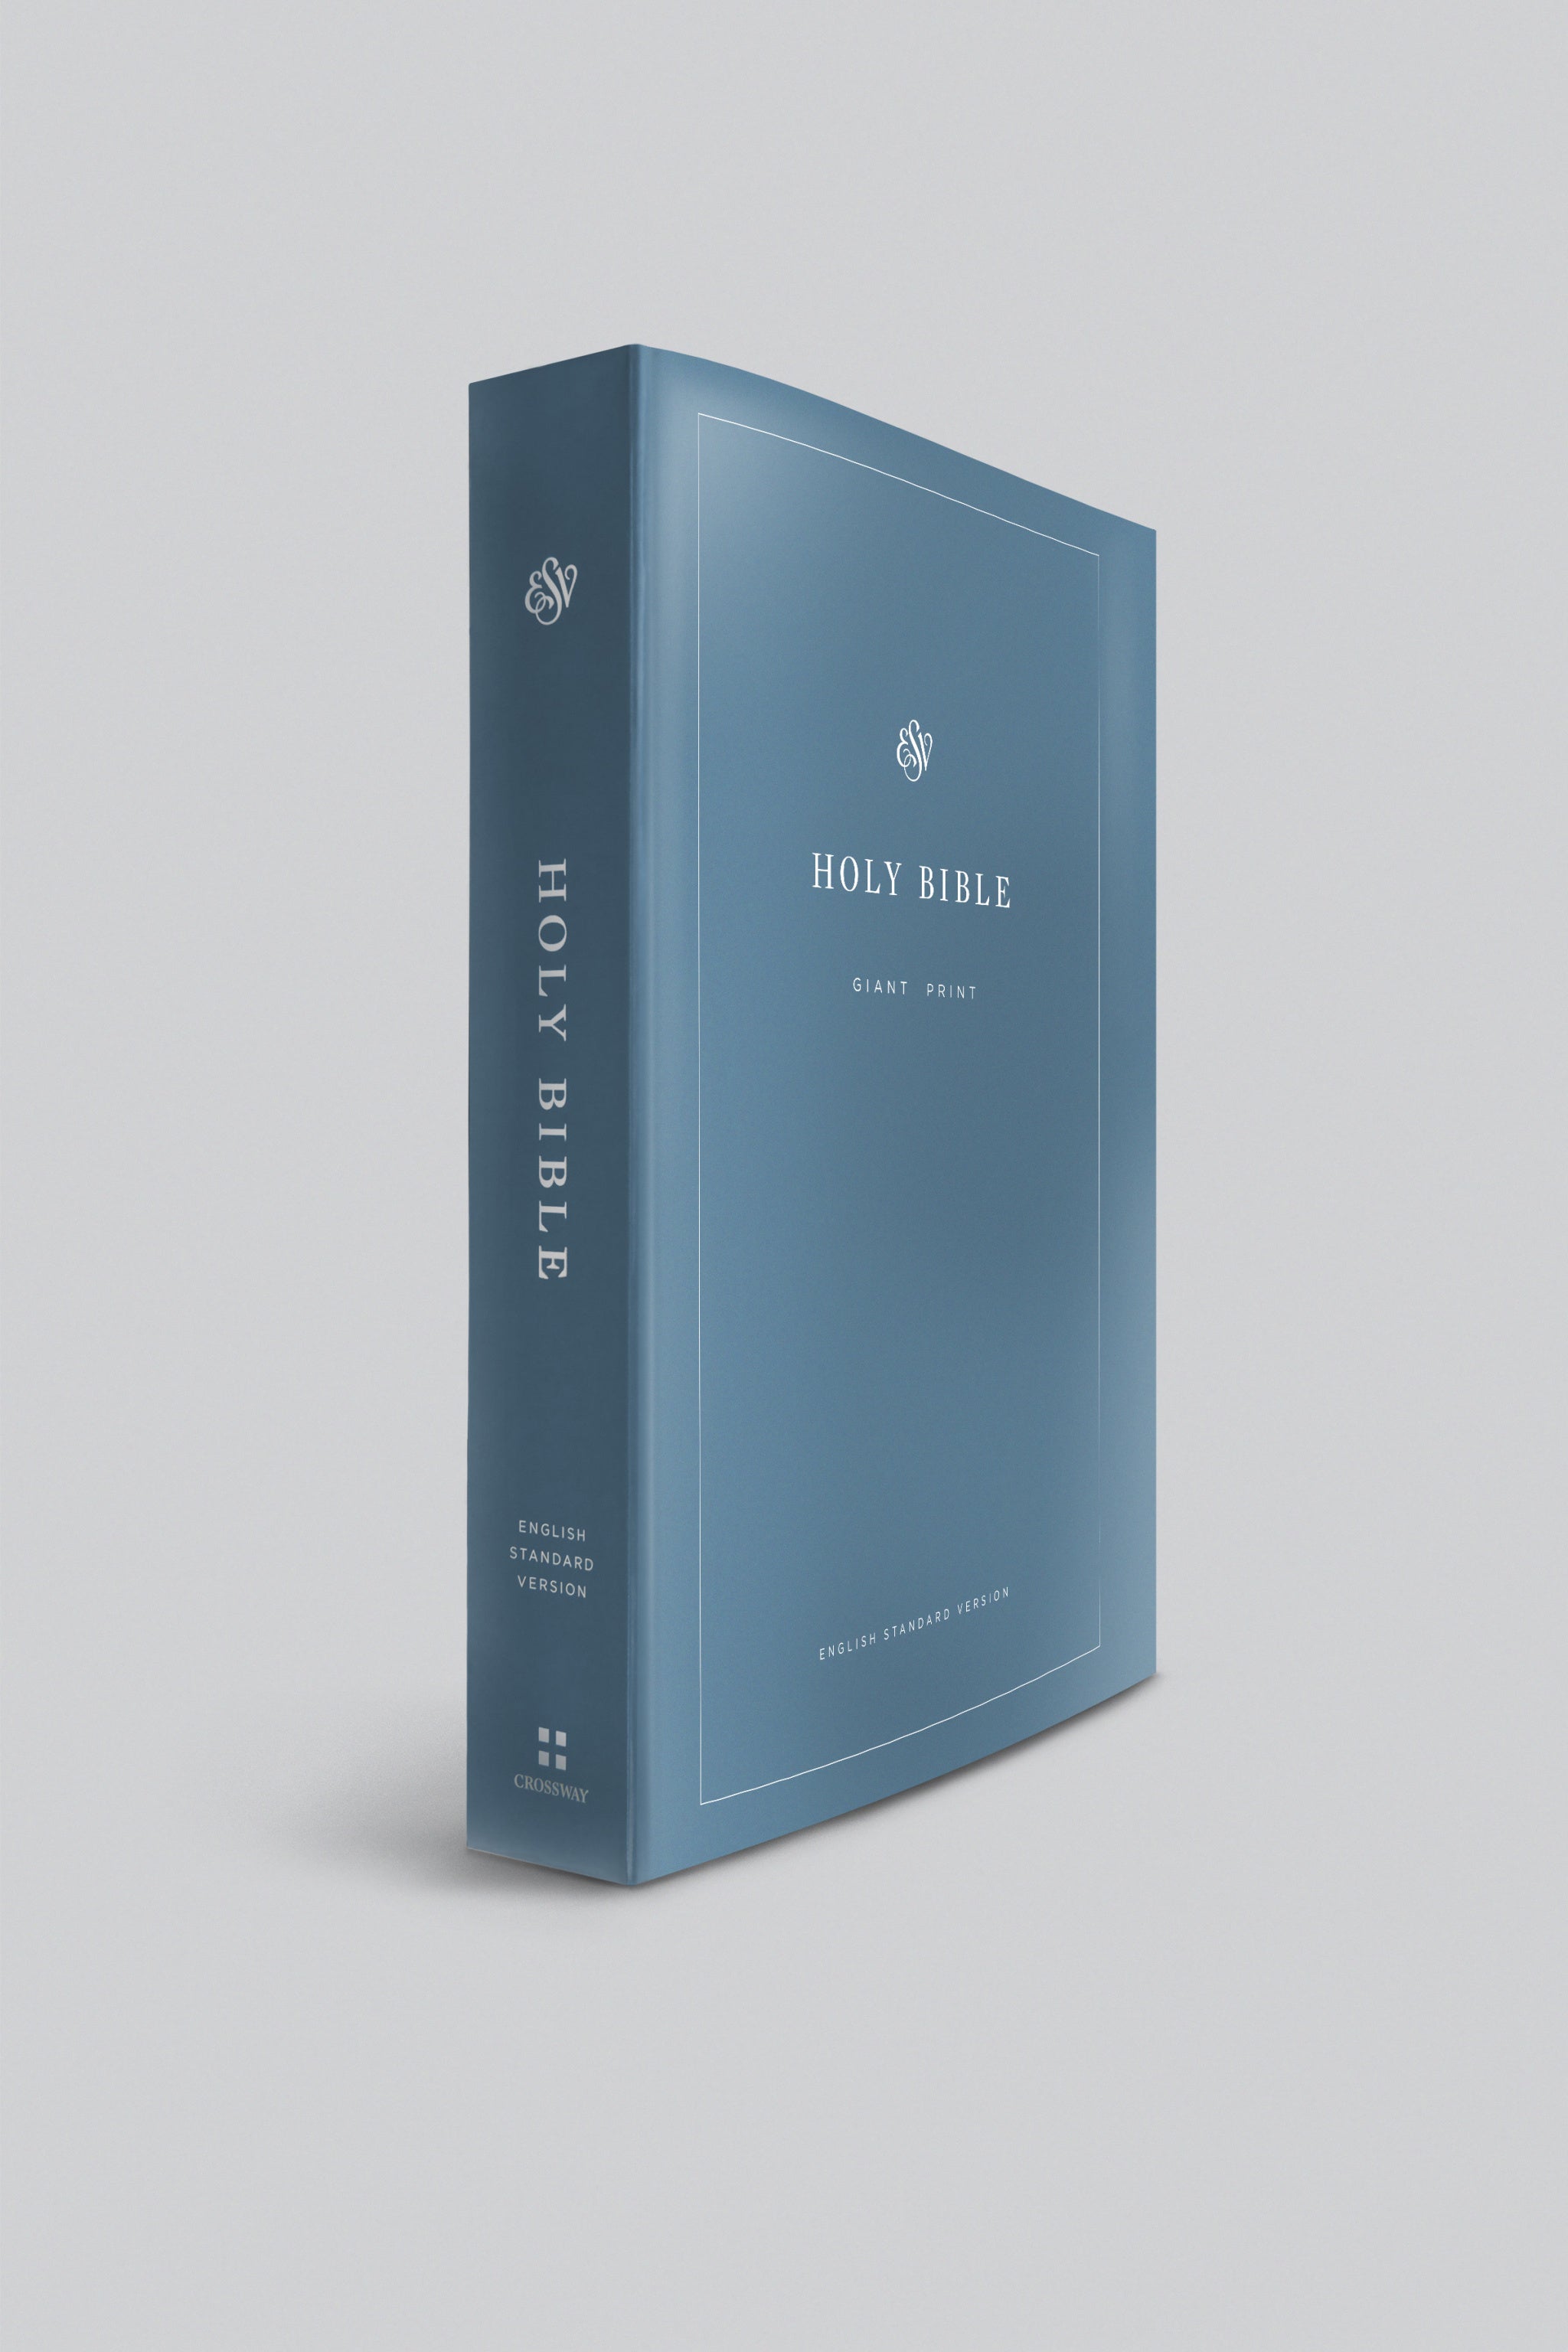 Image of ESV Giant Print Bible, Paperback, Blue, Economy, Why Read The Bible Article, Testament Introductions, 40-Day Reading Plan, Plan of Salvation other